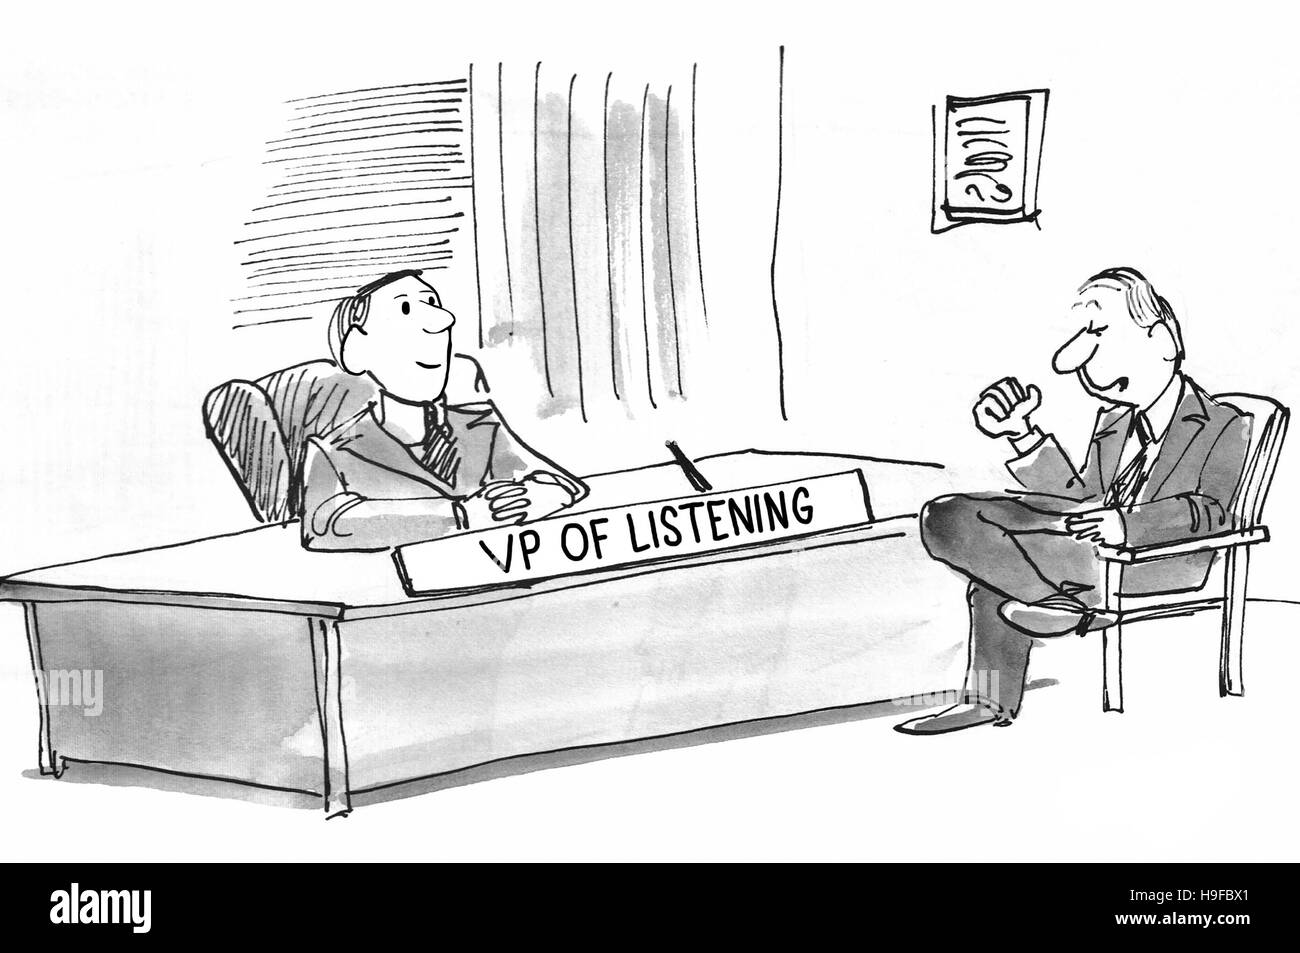 Black and white business illustration of an employee confiding in the VP of LIstening. Stock Photo